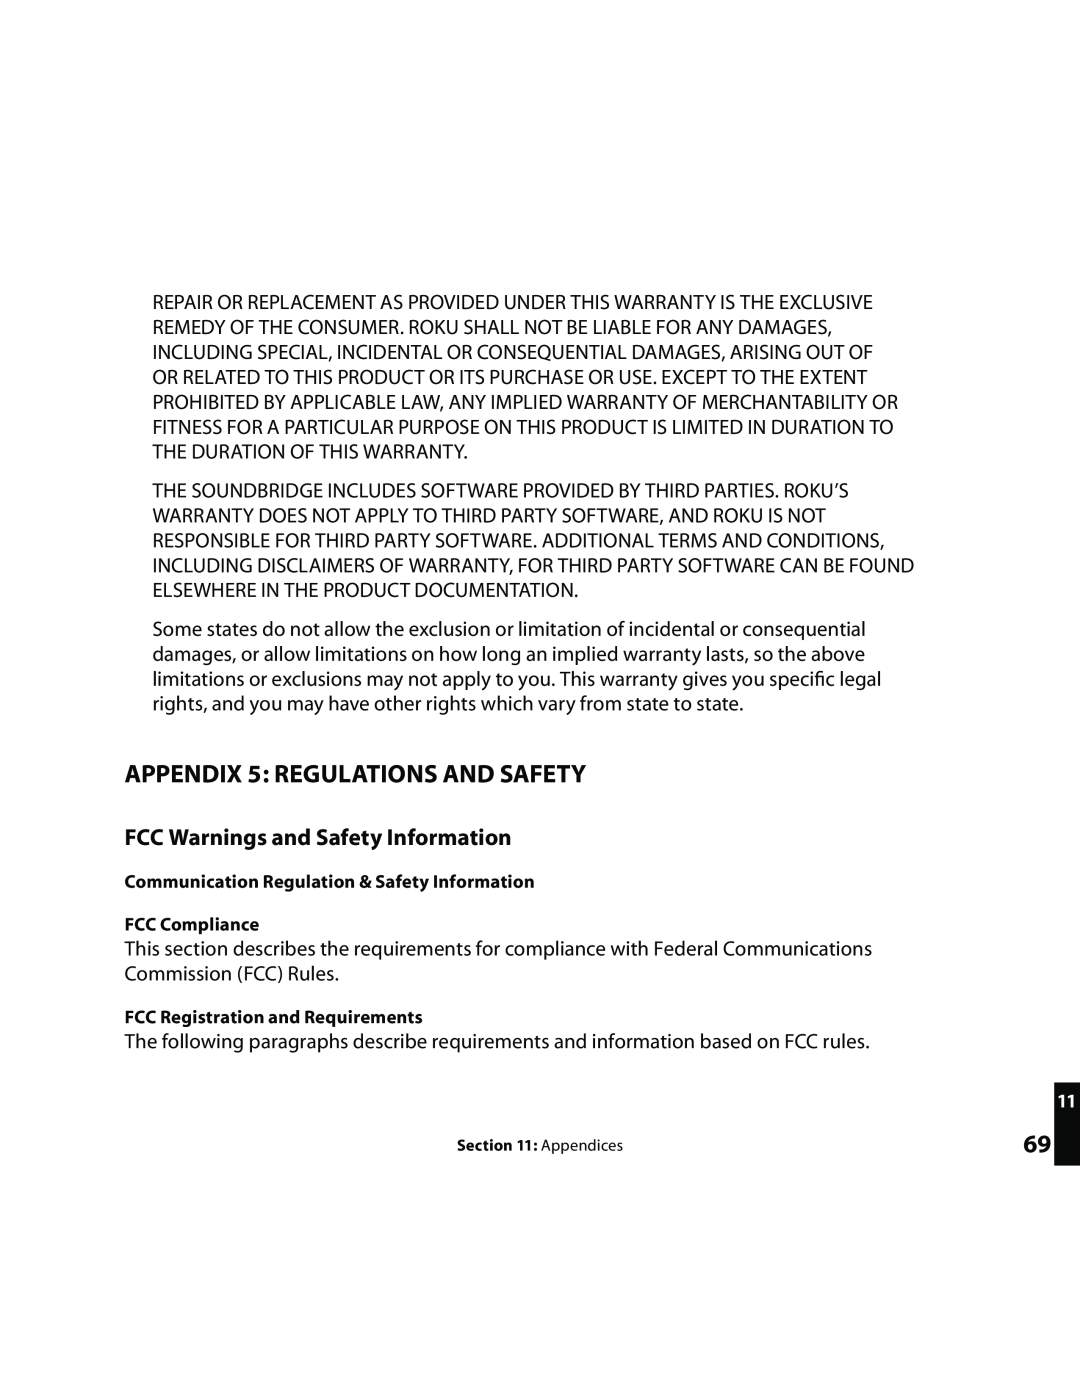 Roku Music Player manual APPENDIX 5: REGULATIONS AND SAFETY, FCC Warnings and Safety Information 